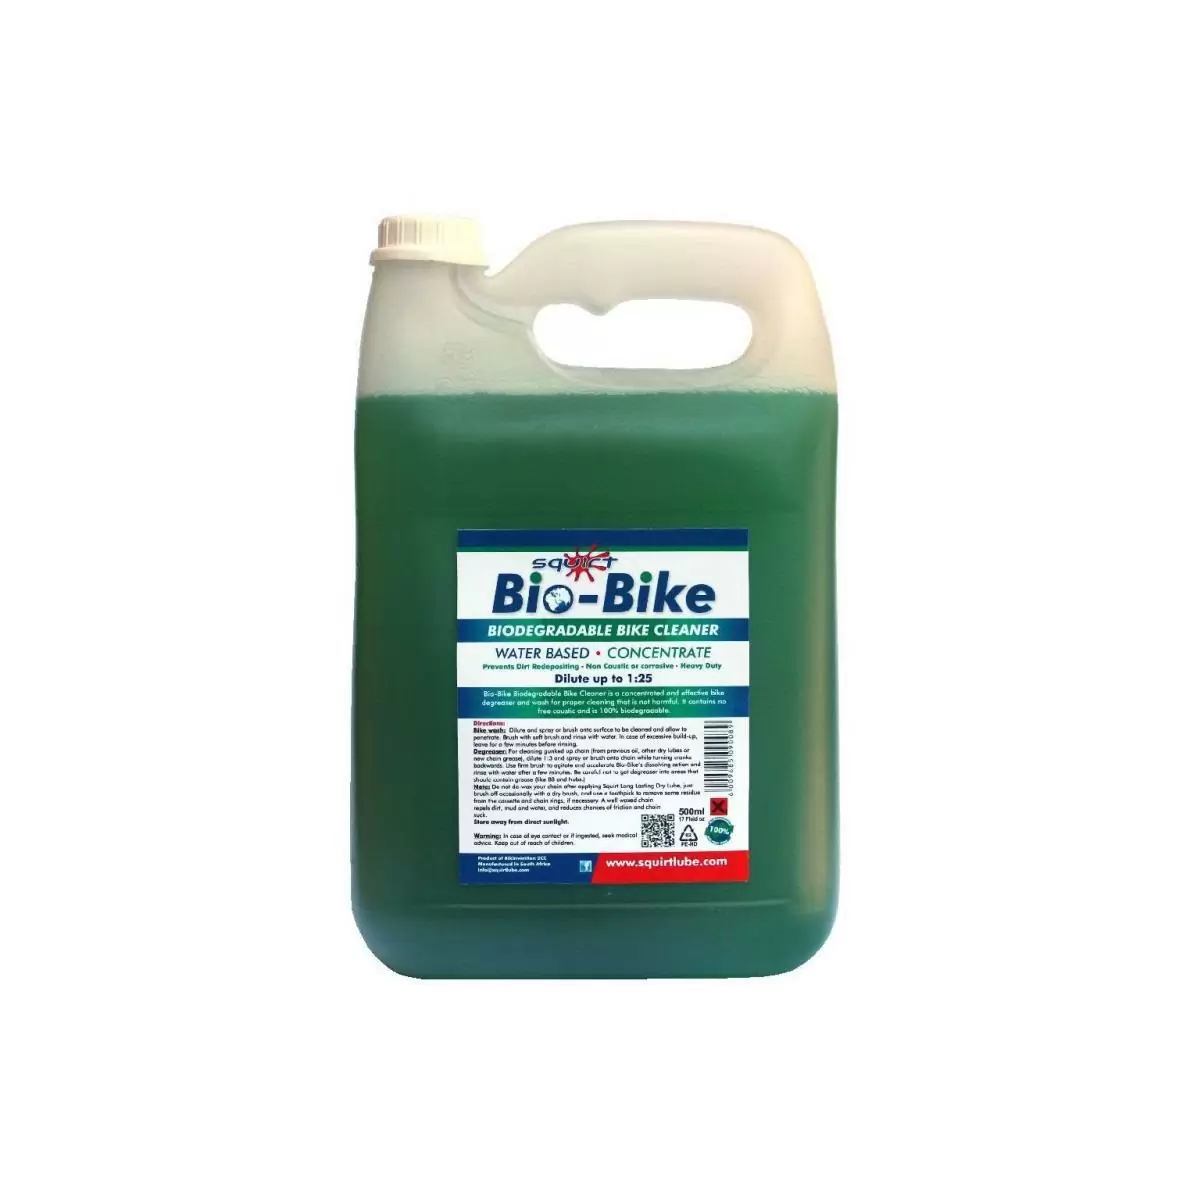 water based protective cleaner concentrated 5 litres biodegradable - image